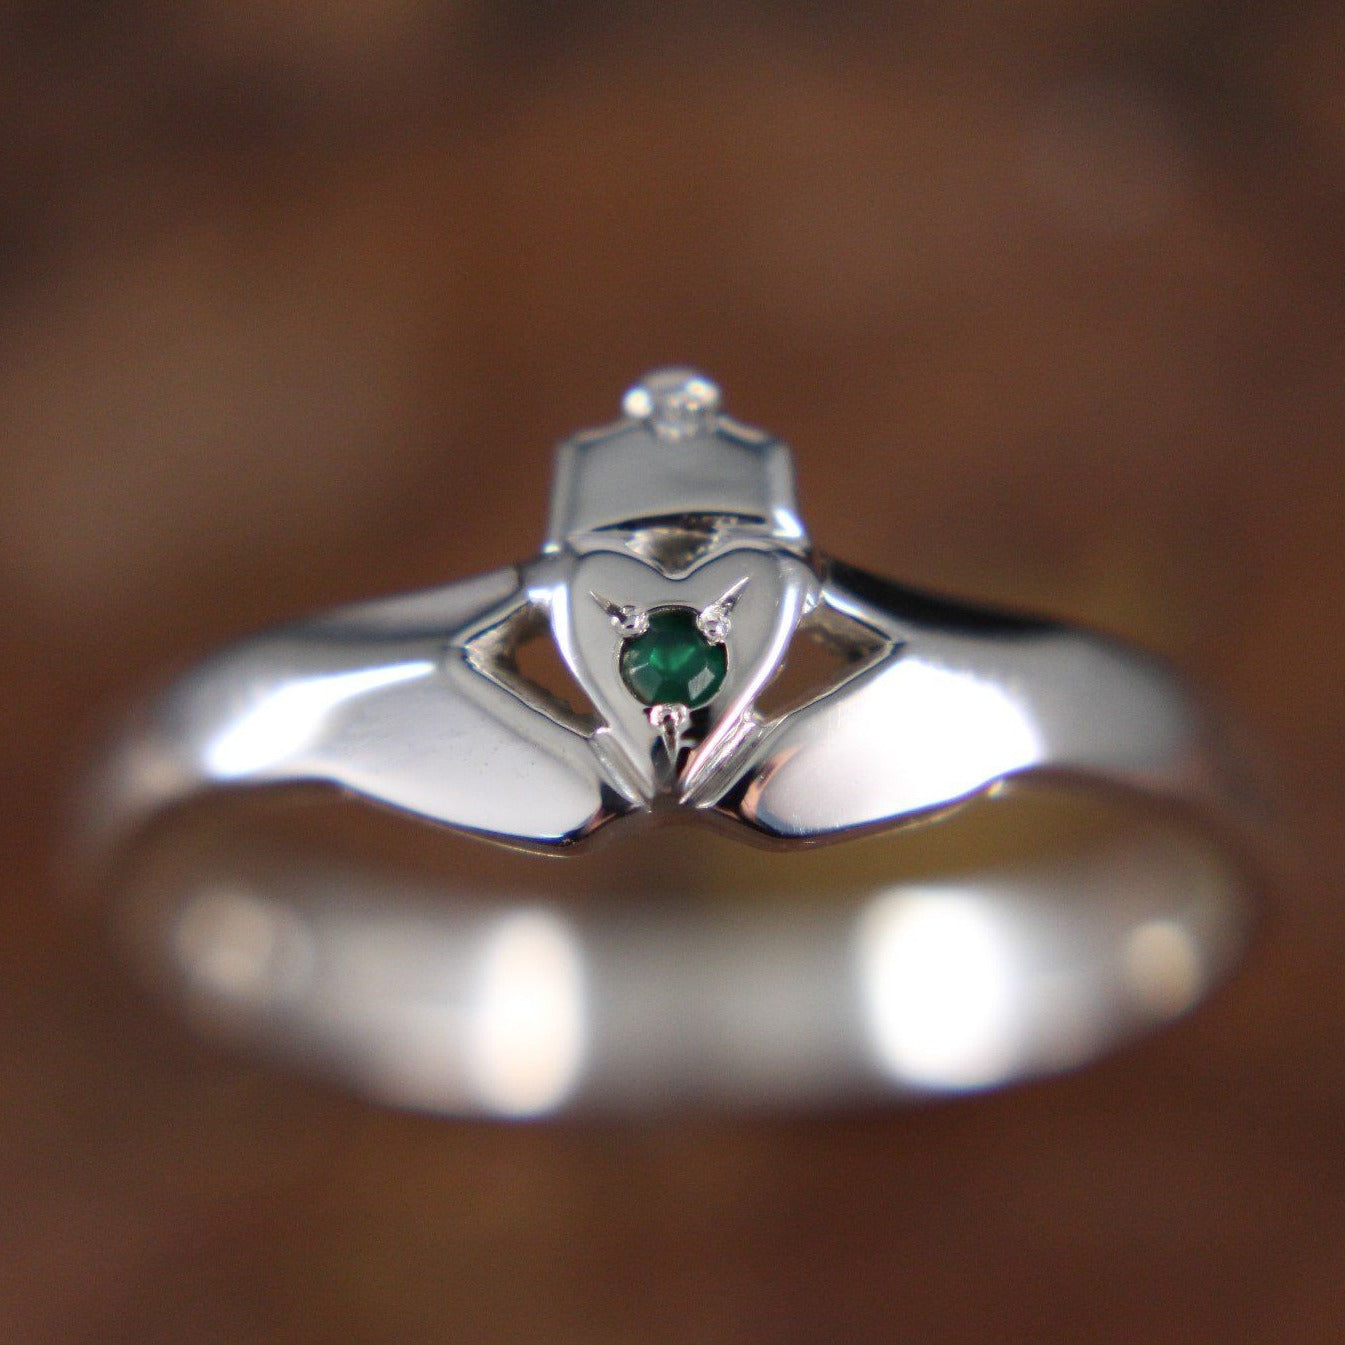 Jewelry - Emerald And Diamond Claddagh Ring, Ladies Silver Claddagh Ring In A Modern Contemporary Style